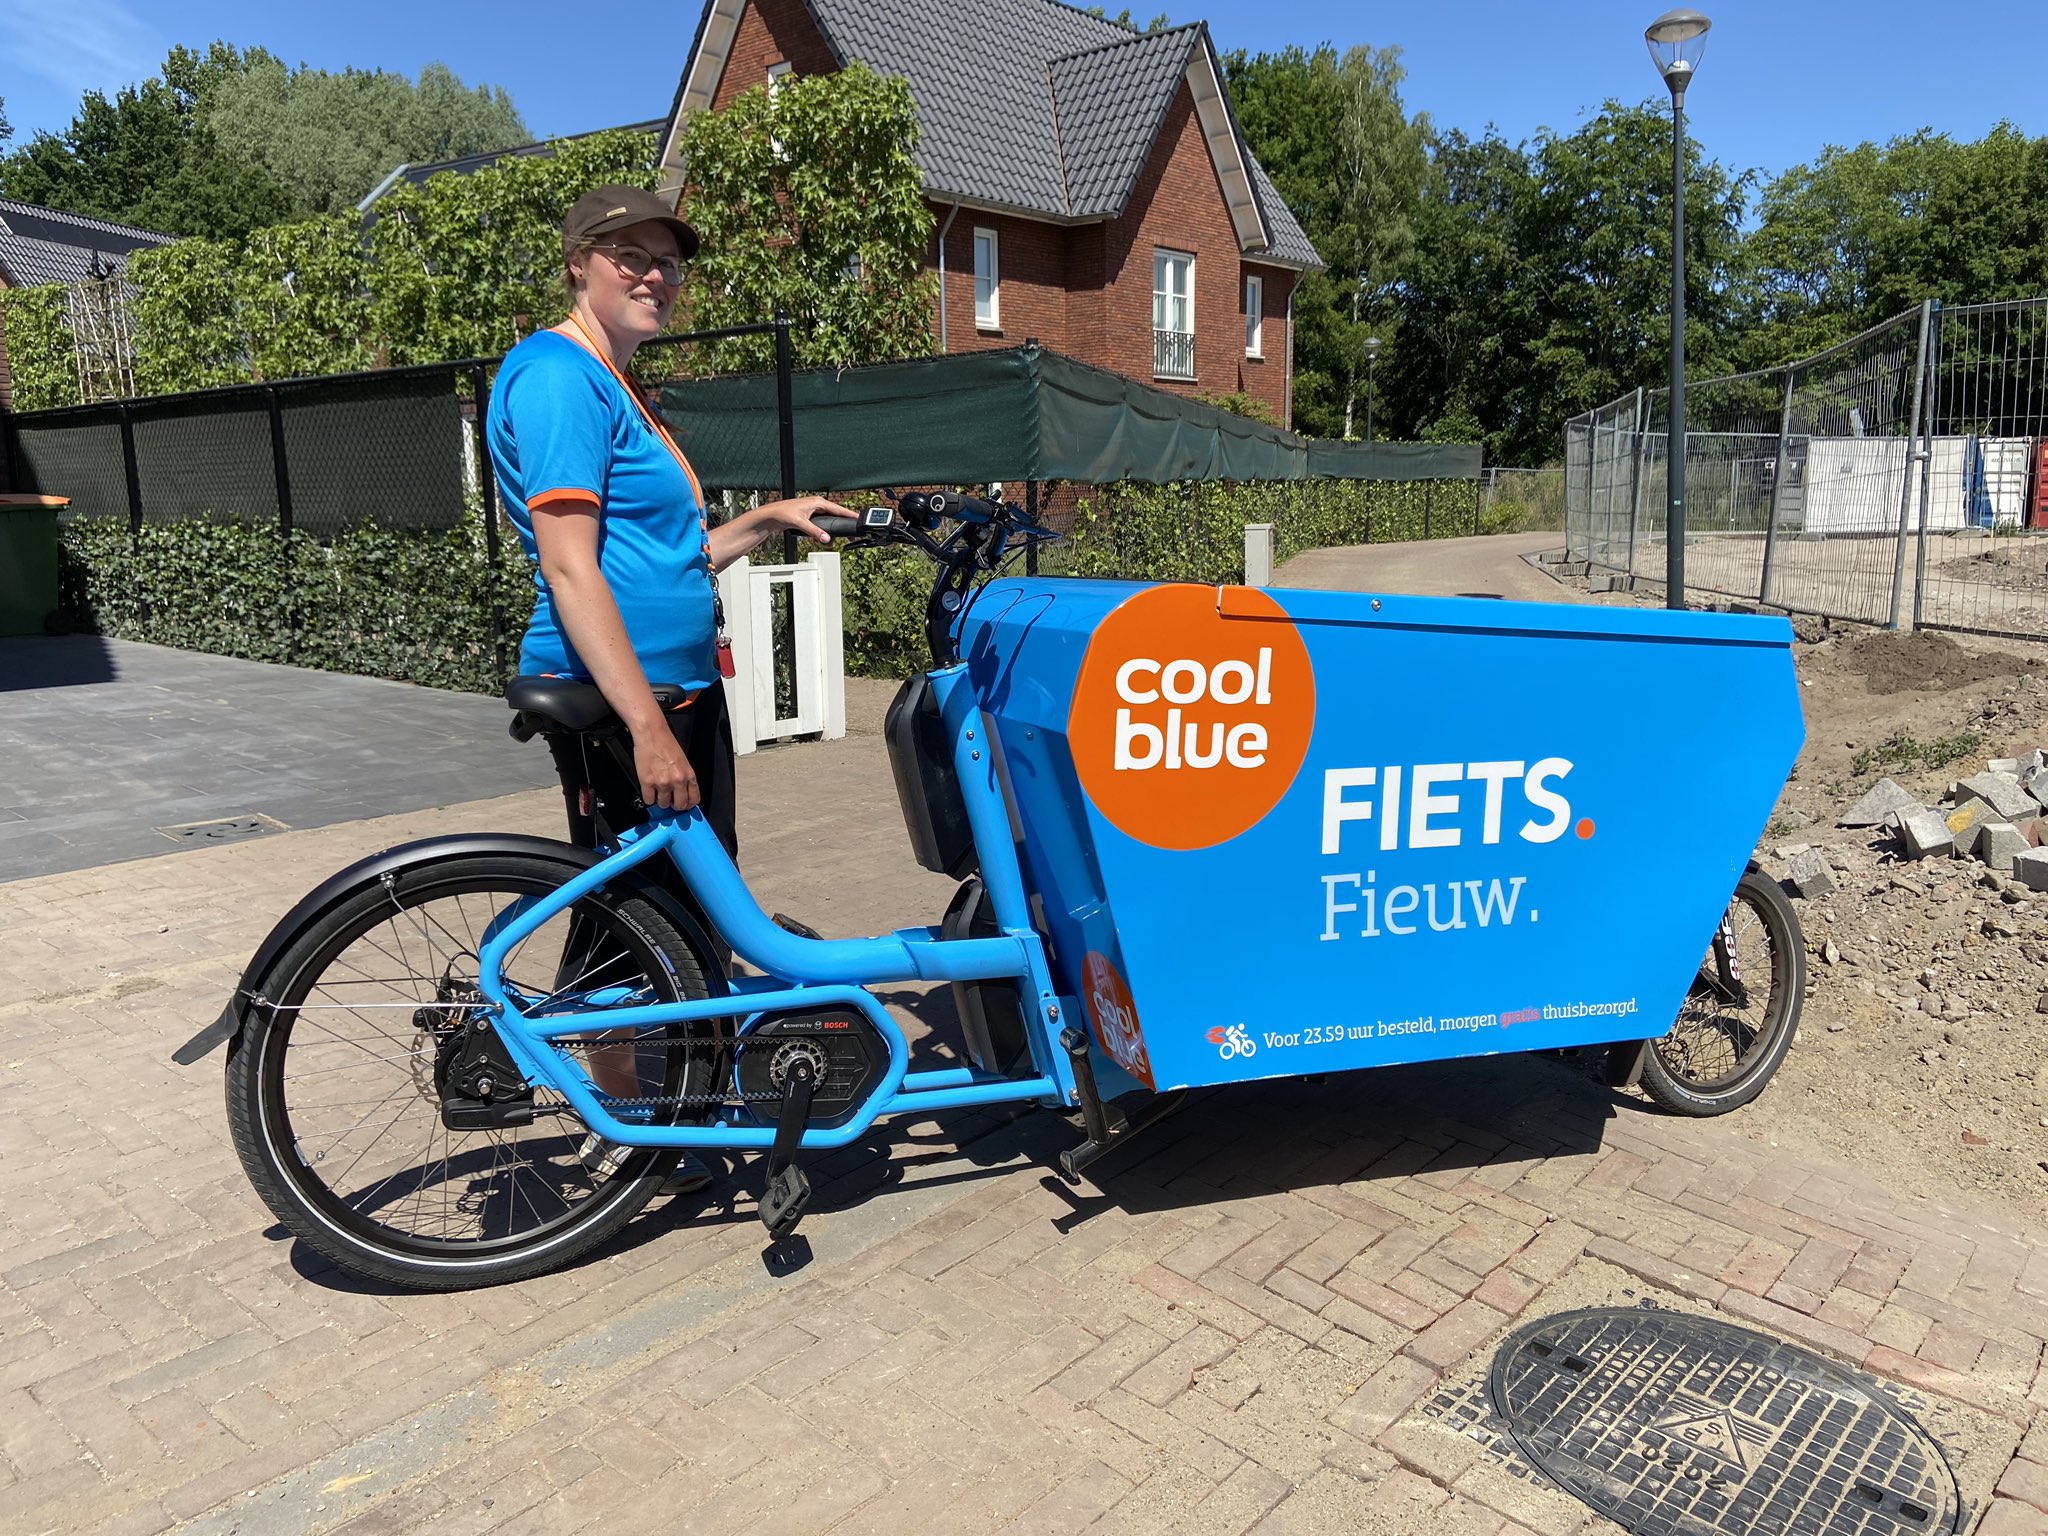 Onbekwaamheid Ventileren Klokje Teije Gorris on Twitter: "Thanks @Coolblue for delivering my package. Nice  brand new bike by the way. Great that you now have them in Breda as well.  Looking forward to the next